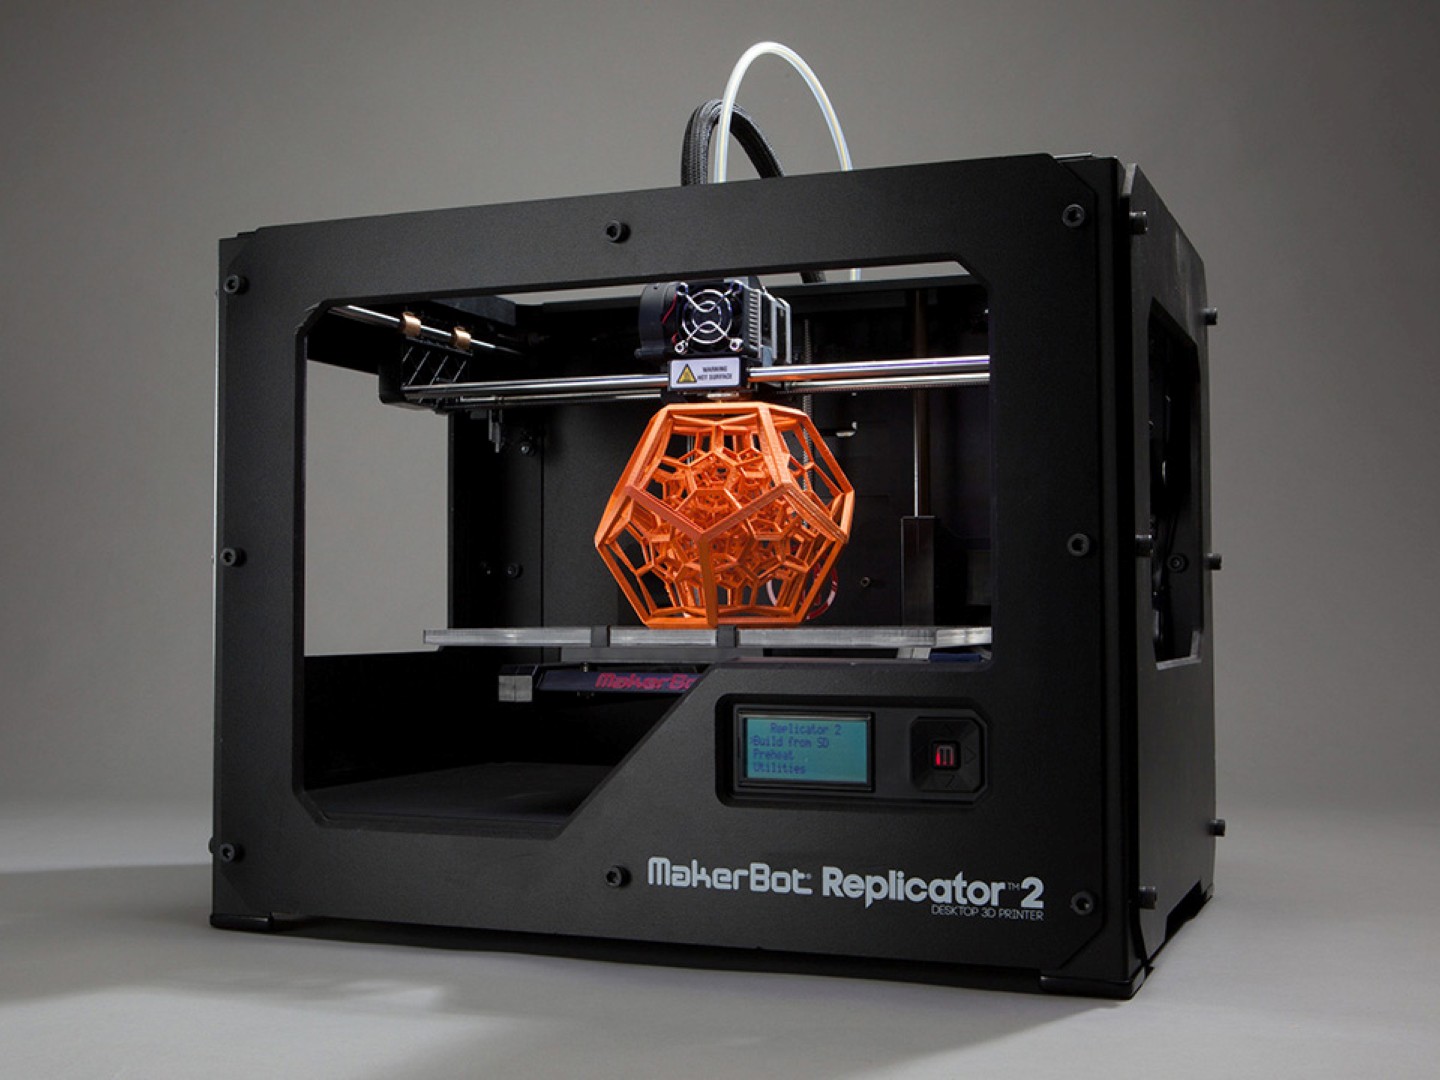 MakerBot Replicator 2 - Global Marketing Articles - Top Seven Pros For Article Writing Works .